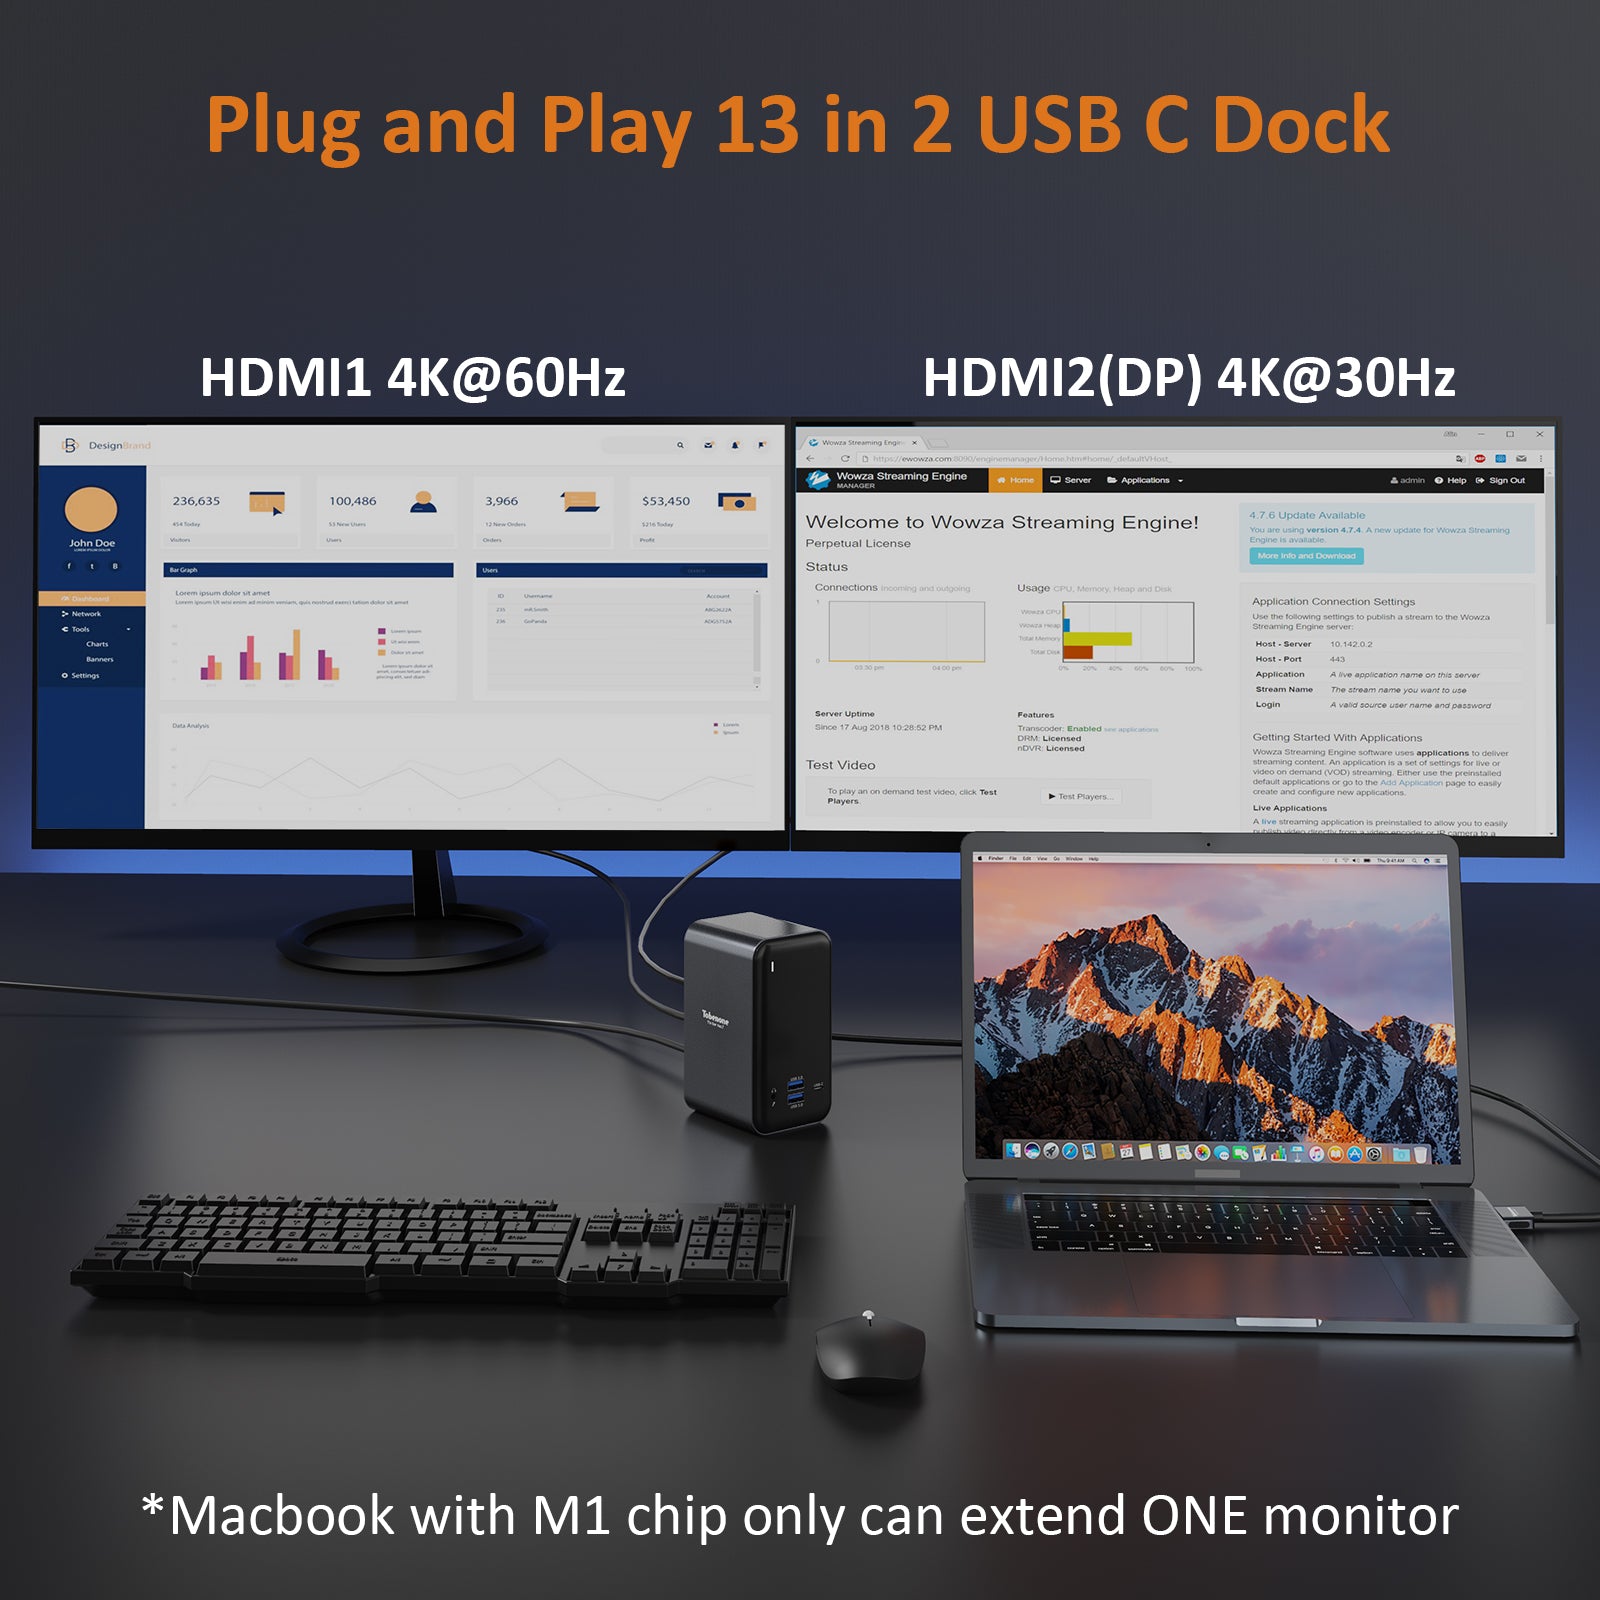 Plug and Play 13 in 2 USB C Dock for MacBook Pro MacBook Air